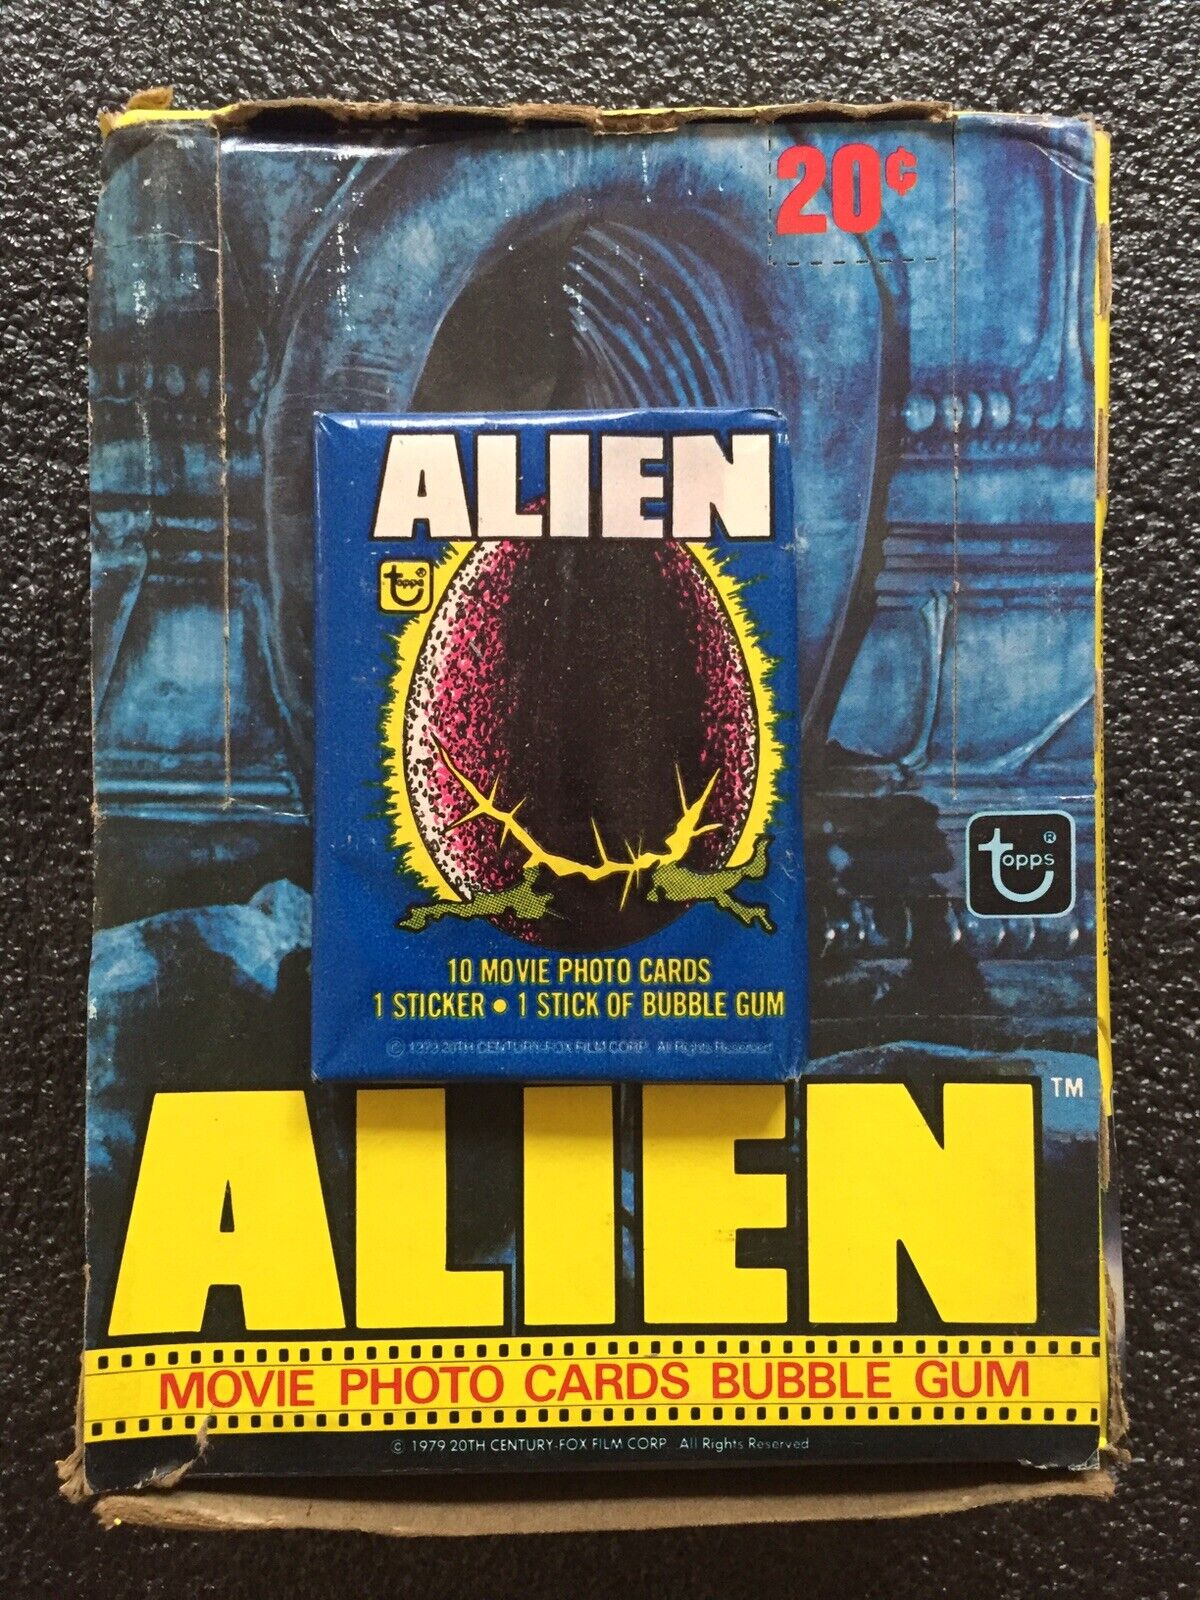 1979 Topps ALIEN Factory Sealed Wax Pack Pulled Fresh From Wax Box. Great Deal